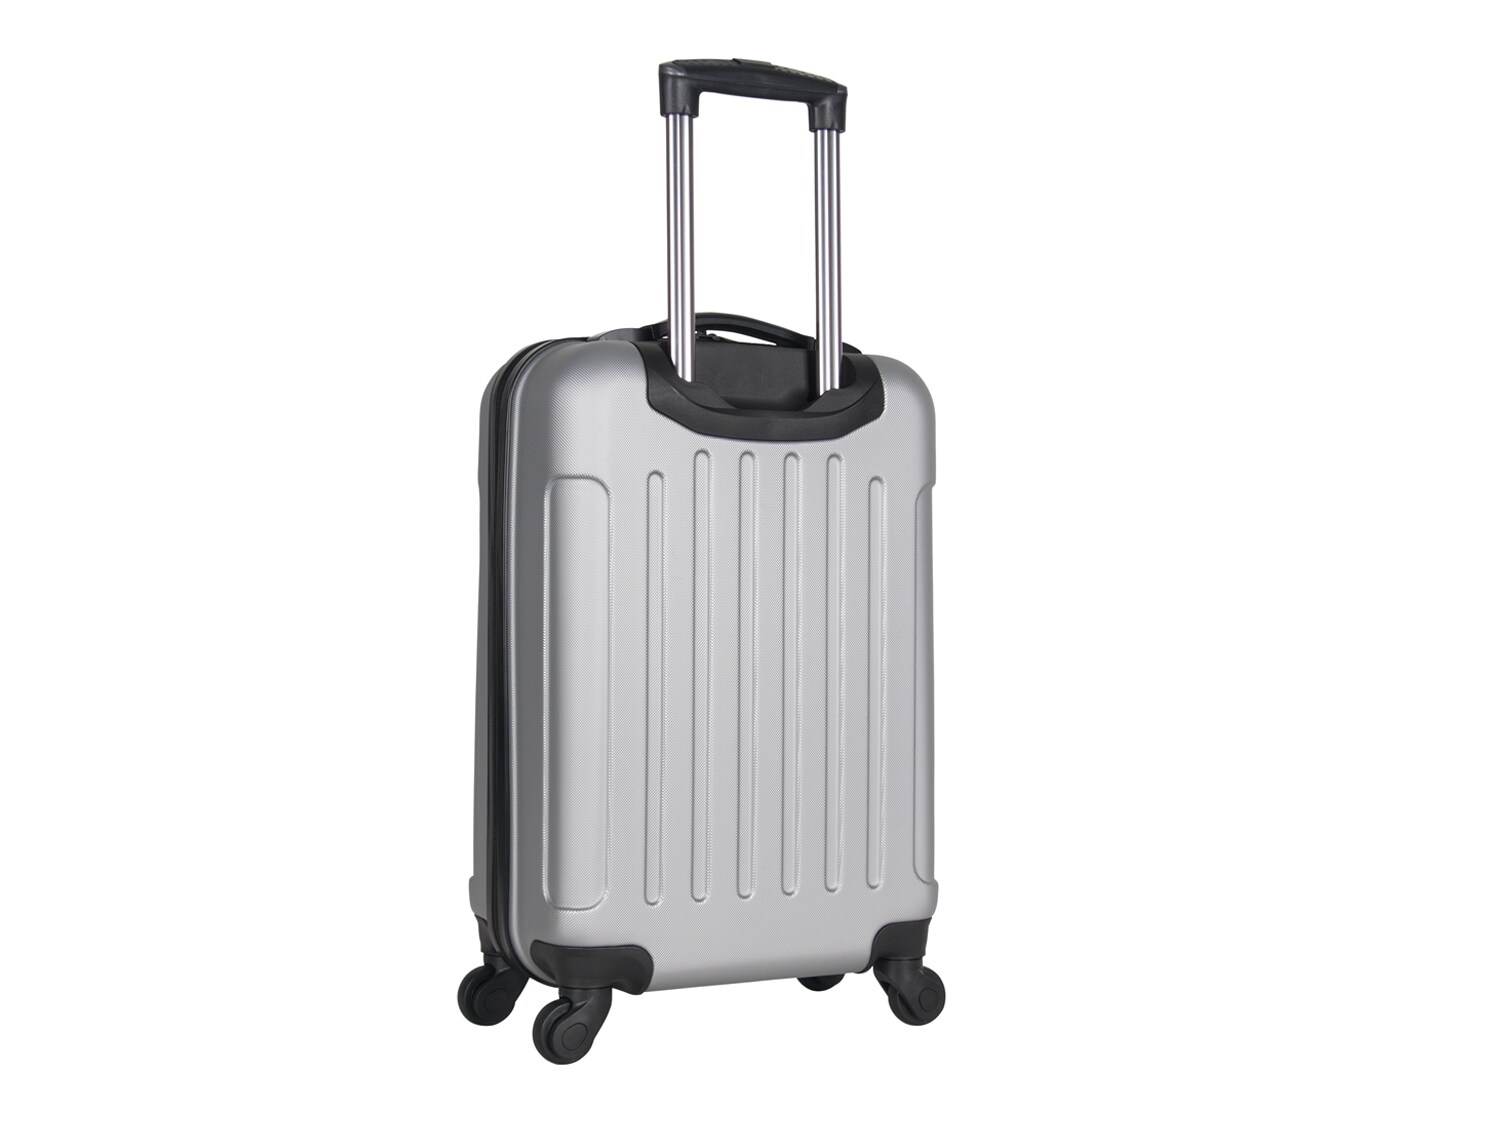 Heritage - Luggage Upright 20-Inch Carry-On Hard Shell Luggage | DSW